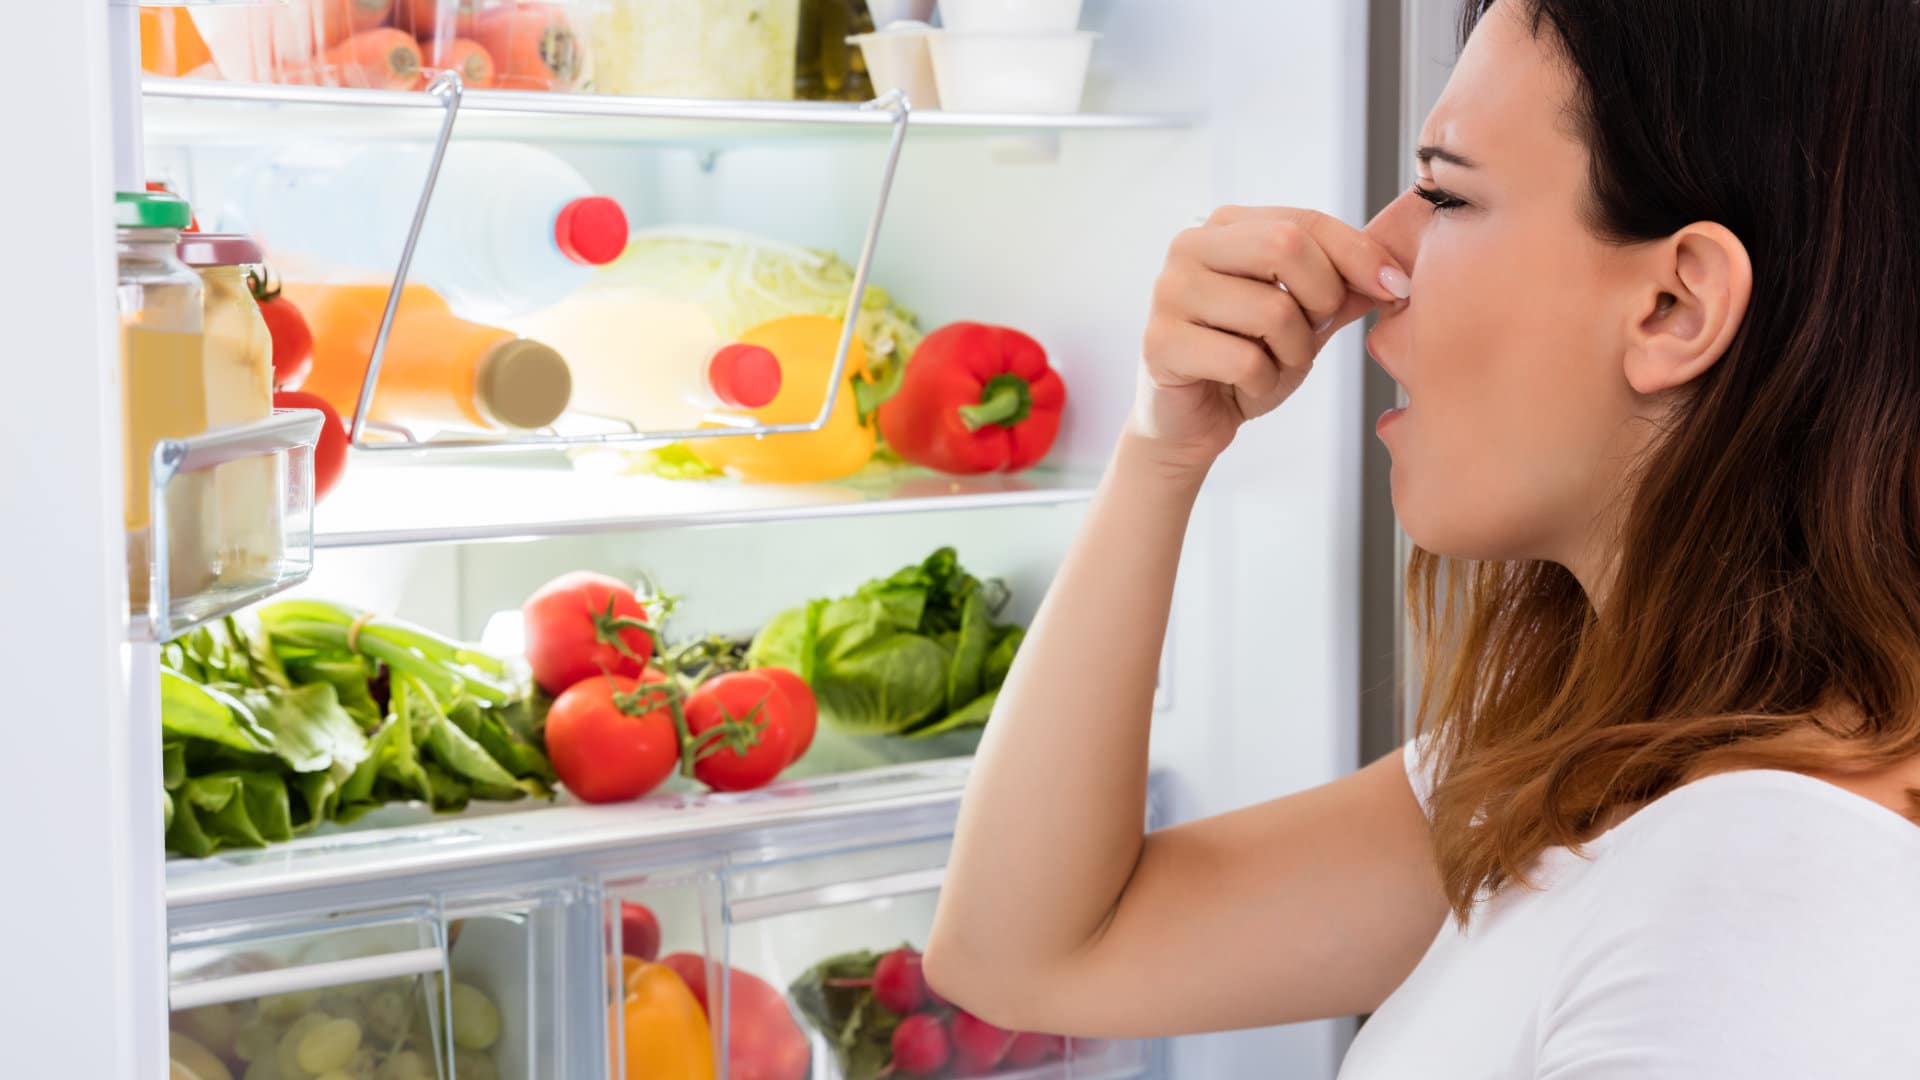 Featured image for “5 Reasons Your Refrigerator Smells”